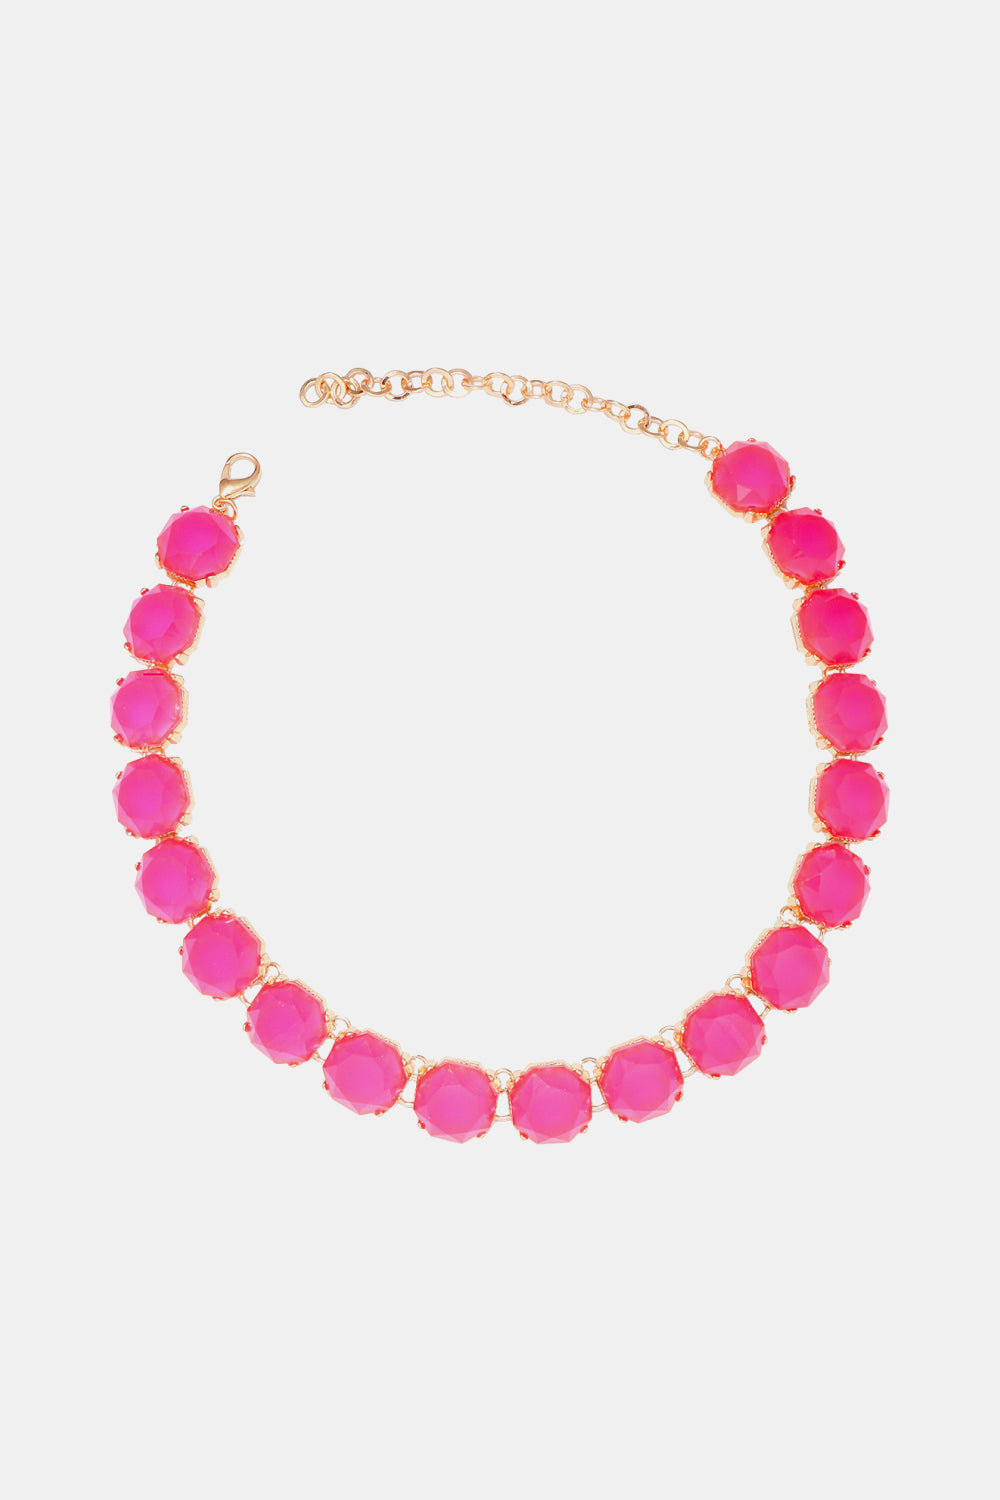 Trendsi Cupid Beauty Supplies Hot Pink / One Size Women Necklace Zinc Alloy Resin Necklace